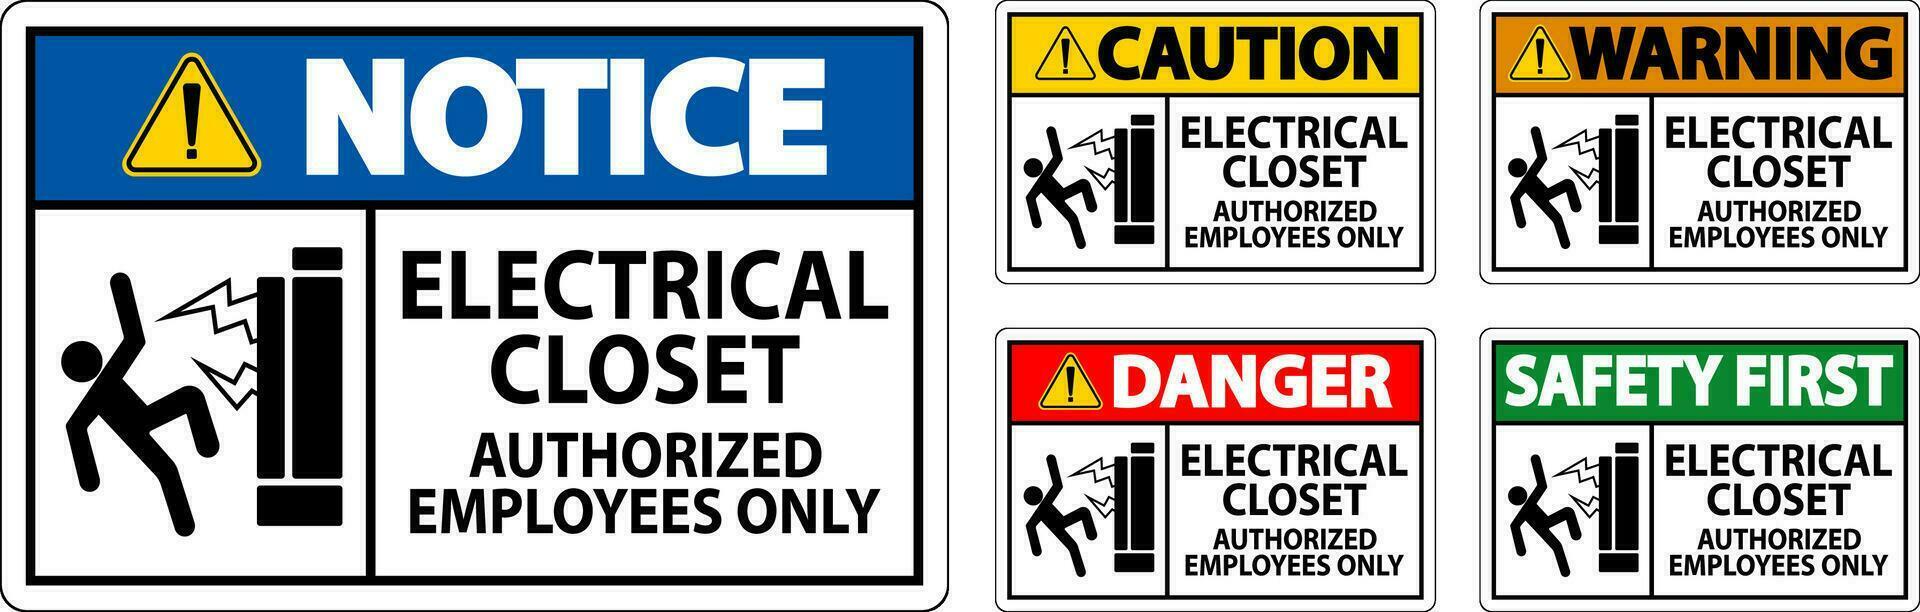 Warning Sign Electrical Closet - Authorized Employees Only vector